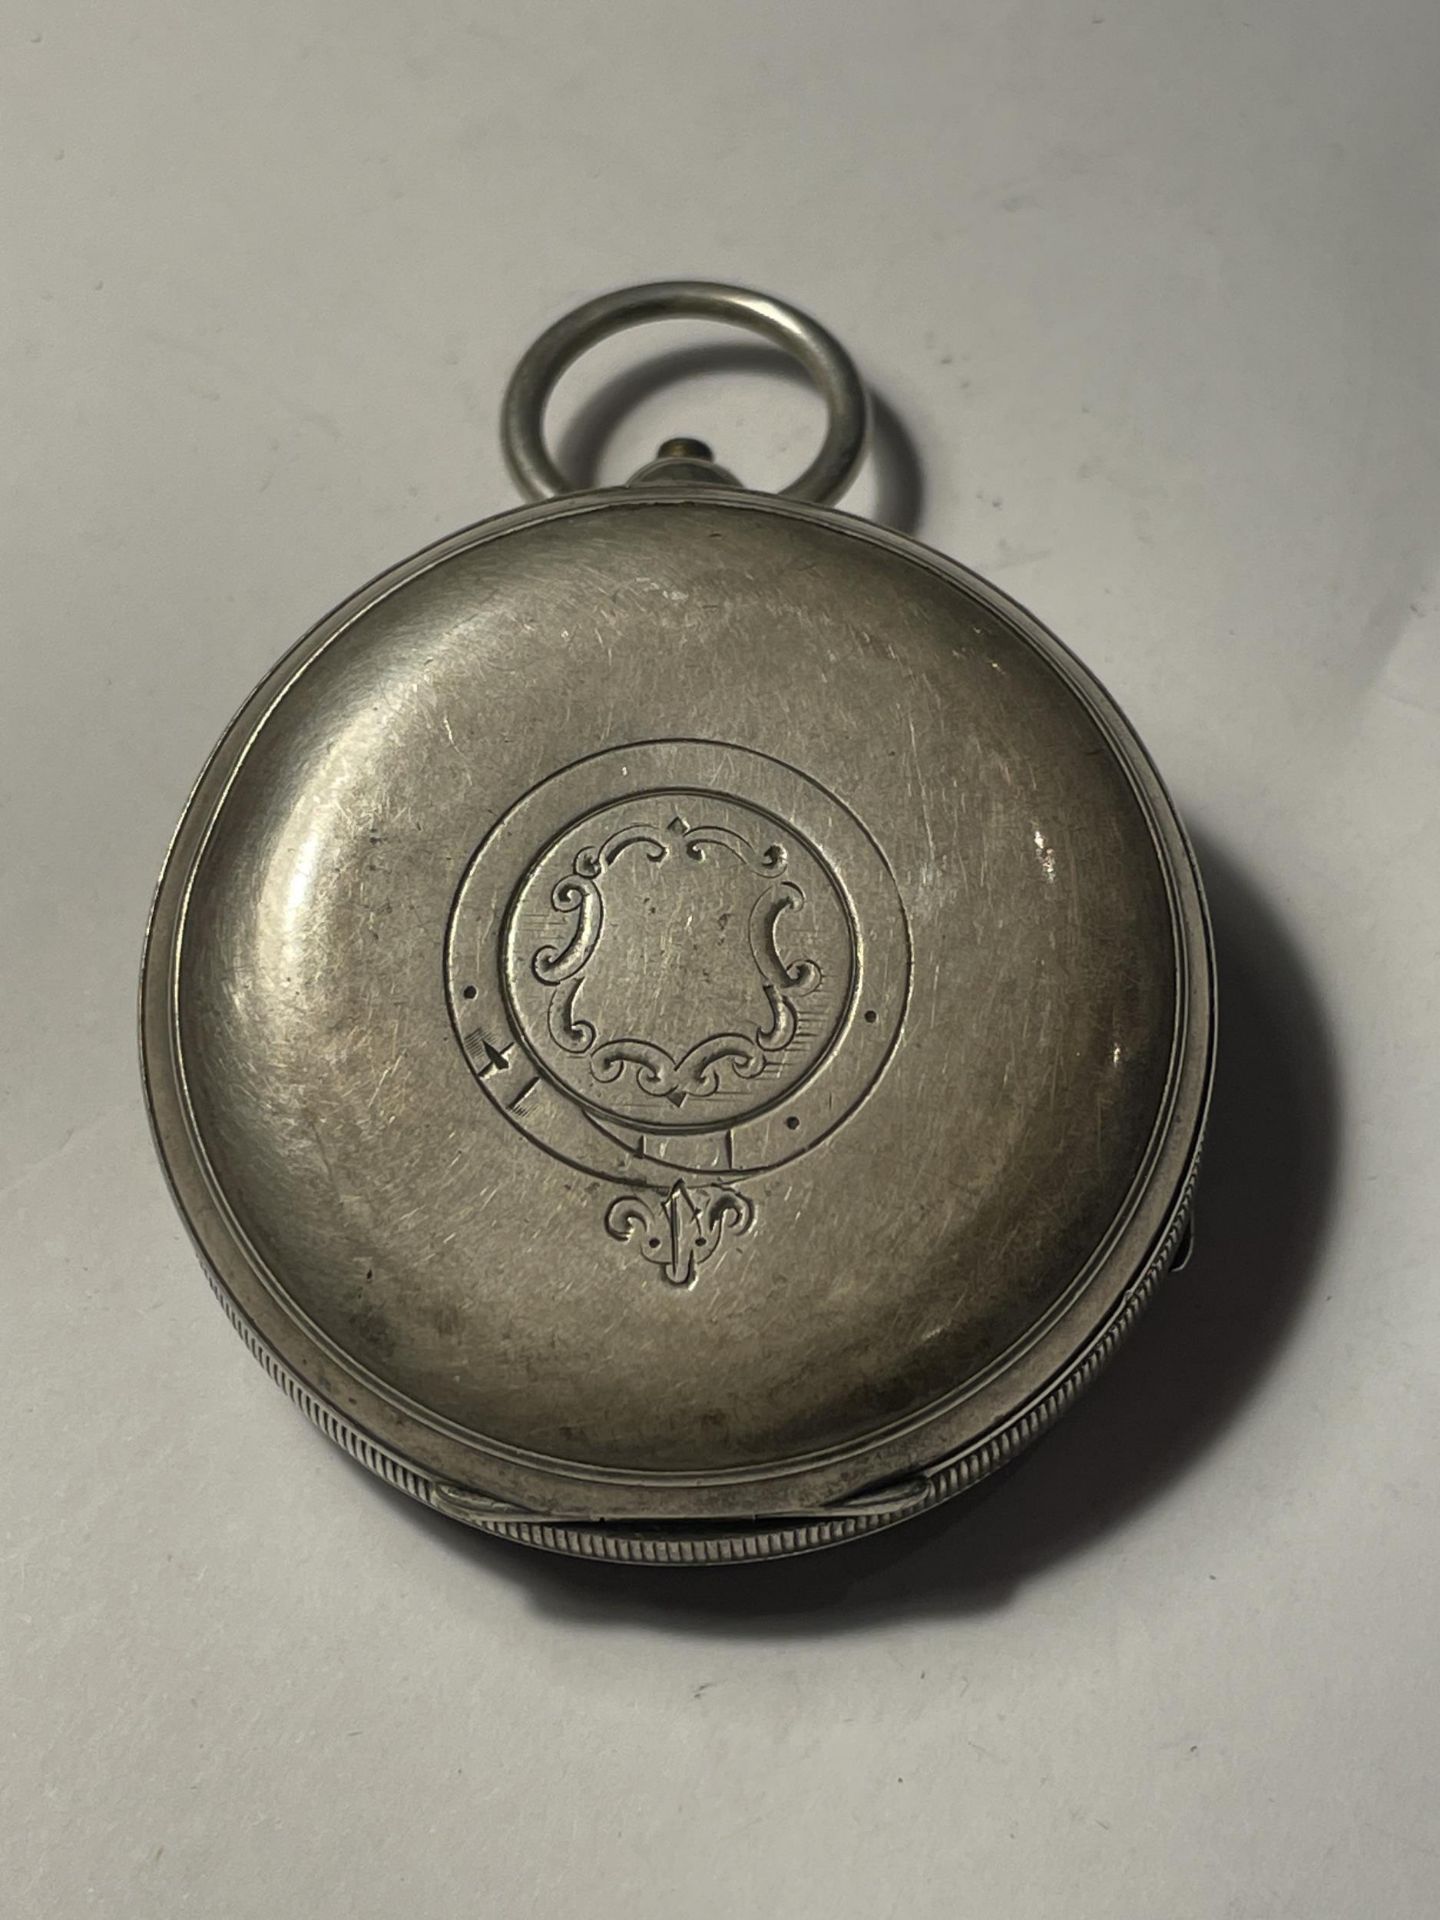 A HALLMARKED CHESTER POCKET WATCH WITH WHITE ENAMEL FACE, ROMAN NUMERALS AND SUB DIAL A/F NO GLASS - Image 2 of 4